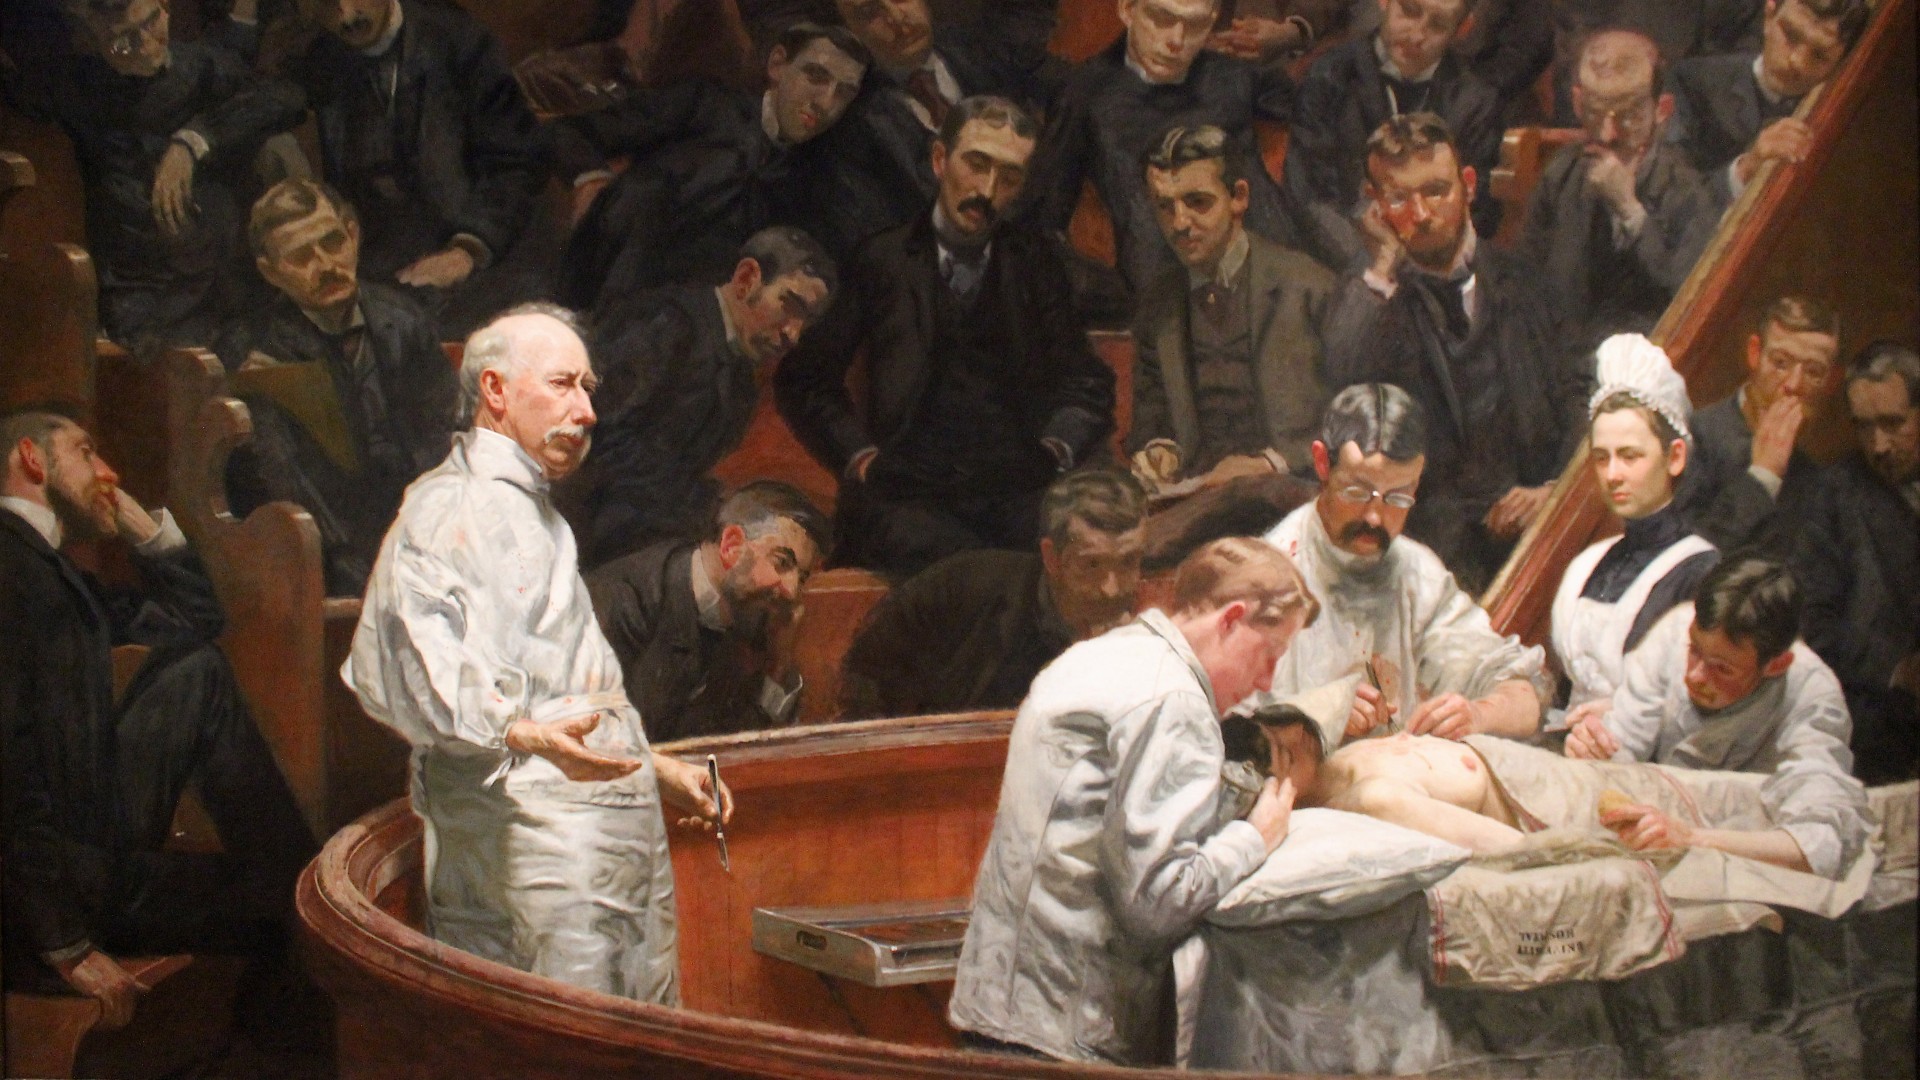 Agnew Clinic by Thomas Eakins